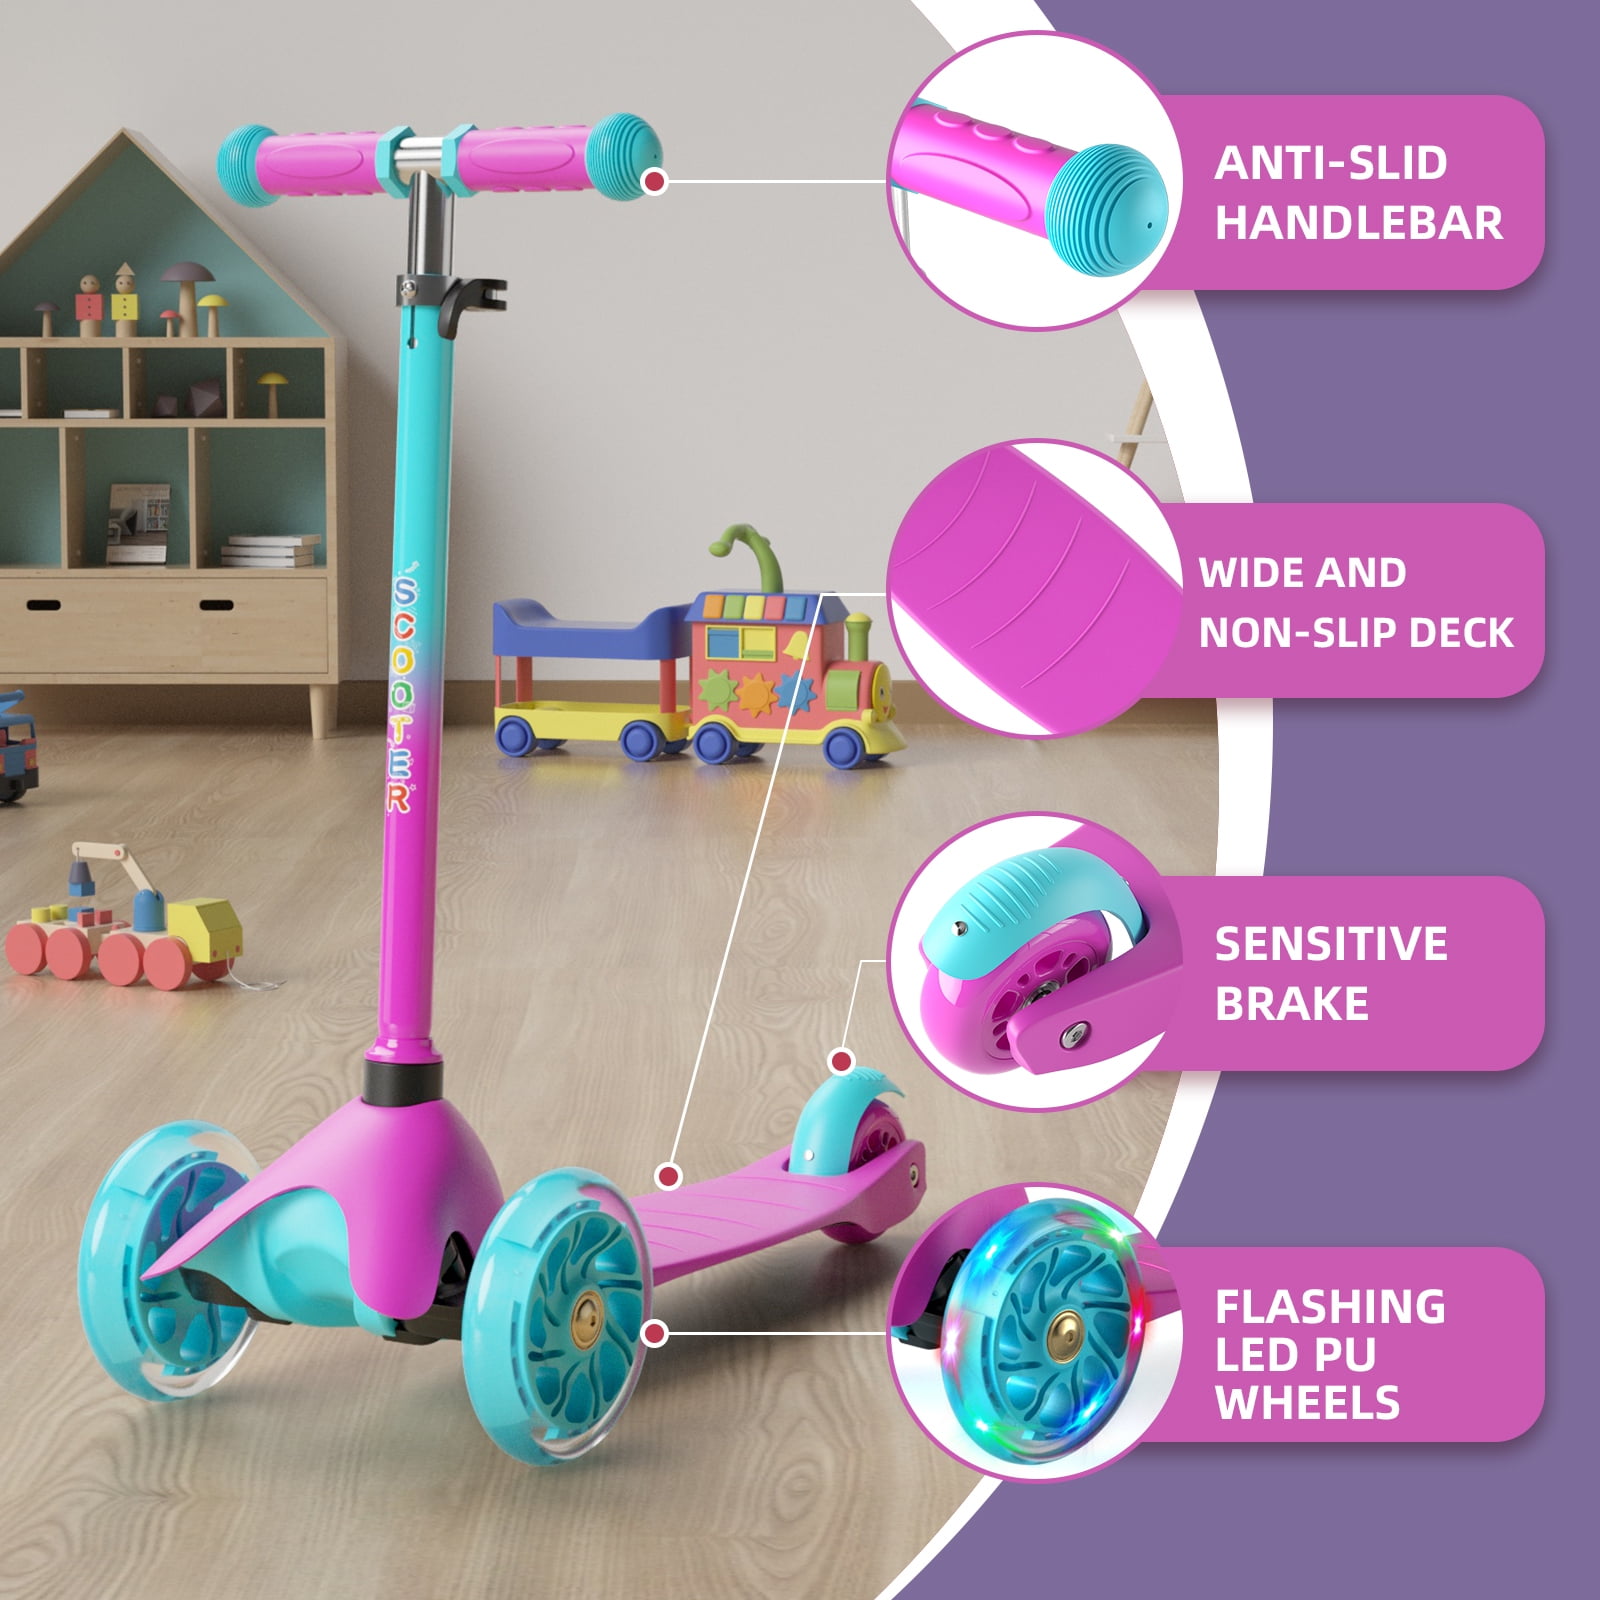 XJD 3 Wheel Scooters for Kids Folding Kick Scooters Adjustable Height,  Anti-Slip Deck, Flashing Wheel Lights, for Boys/Girls 2-5 Years Old